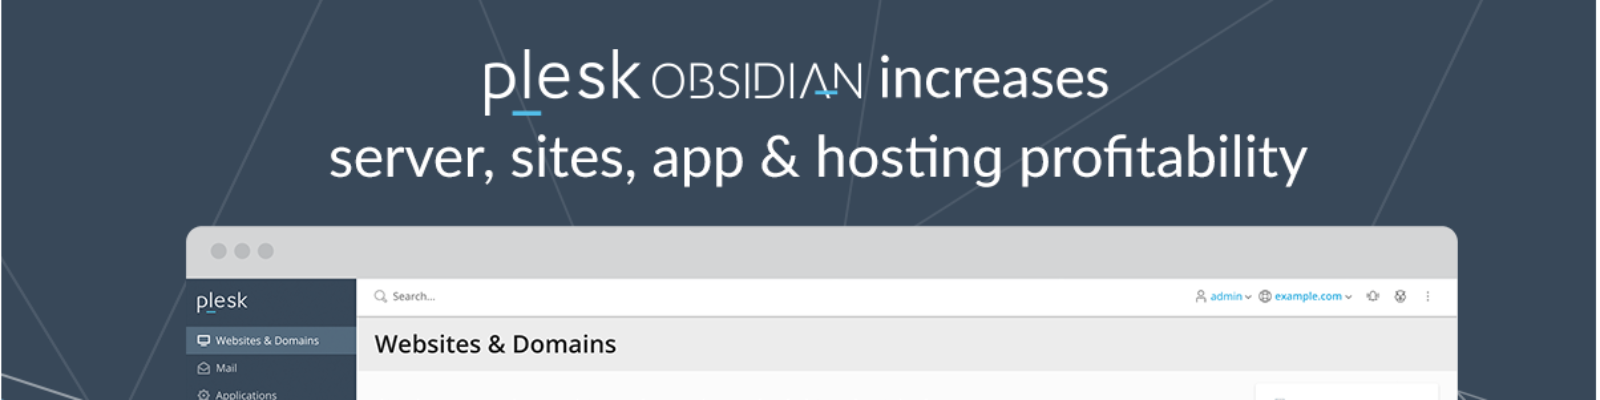 Plesk Obsidian Increases server, sites, app, and hosting profitability. Cover